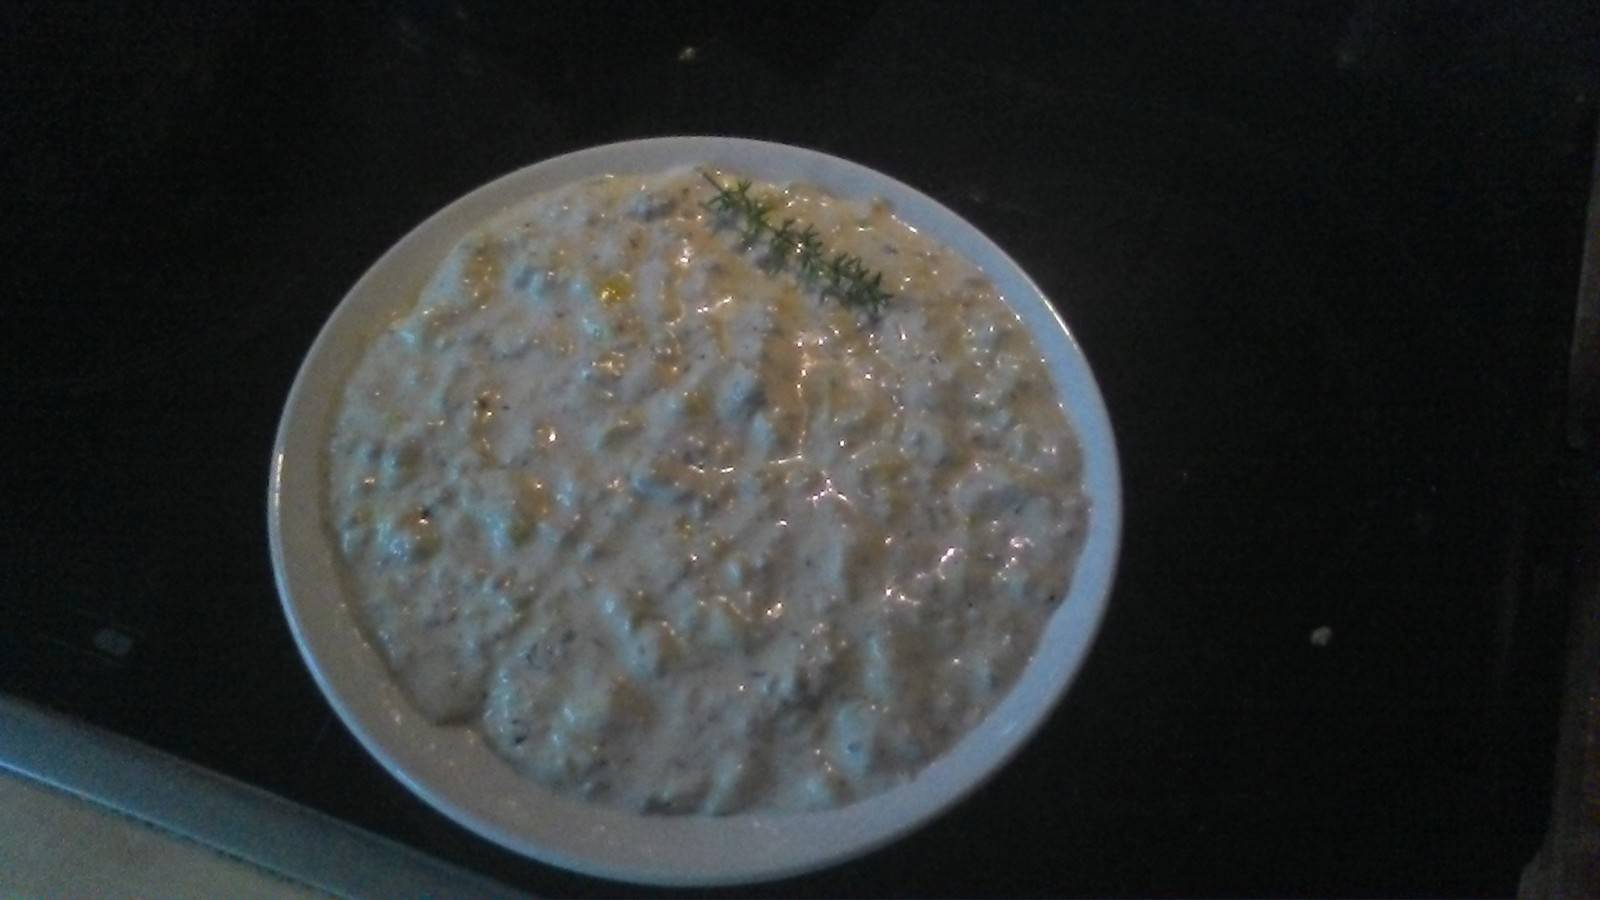 Lauch-Käse-Suppe